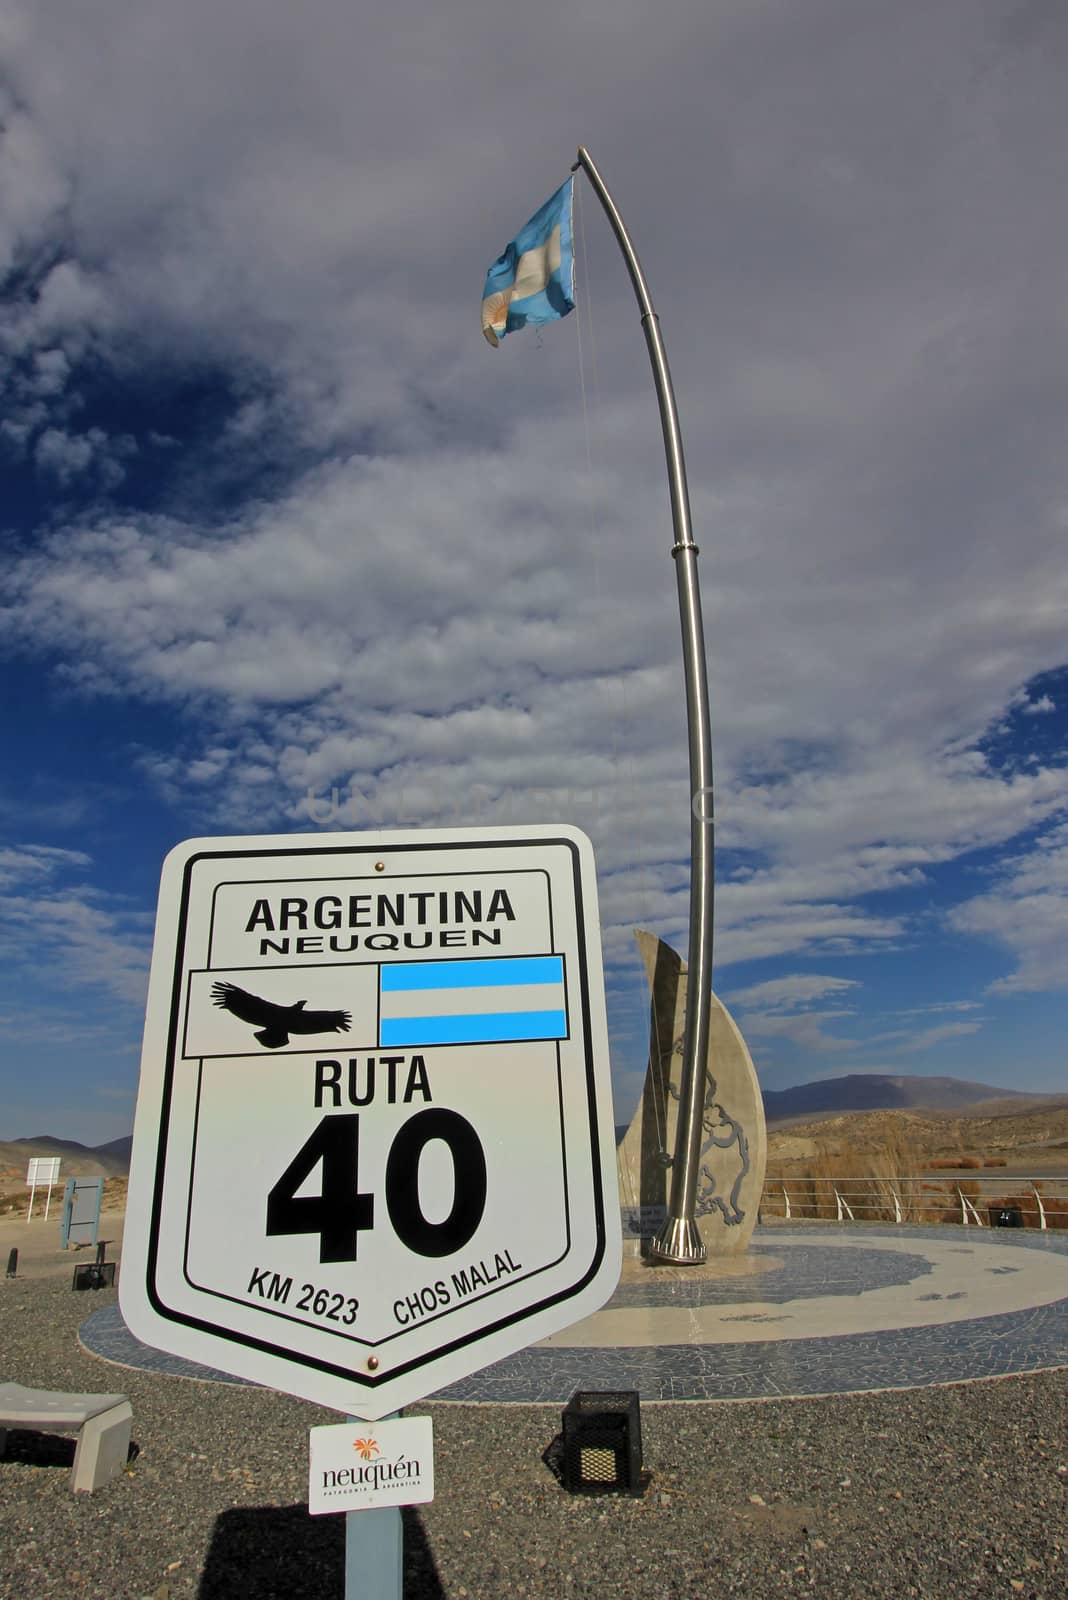 Road sign in the middle of ruta route 40, Argentina by cicloco